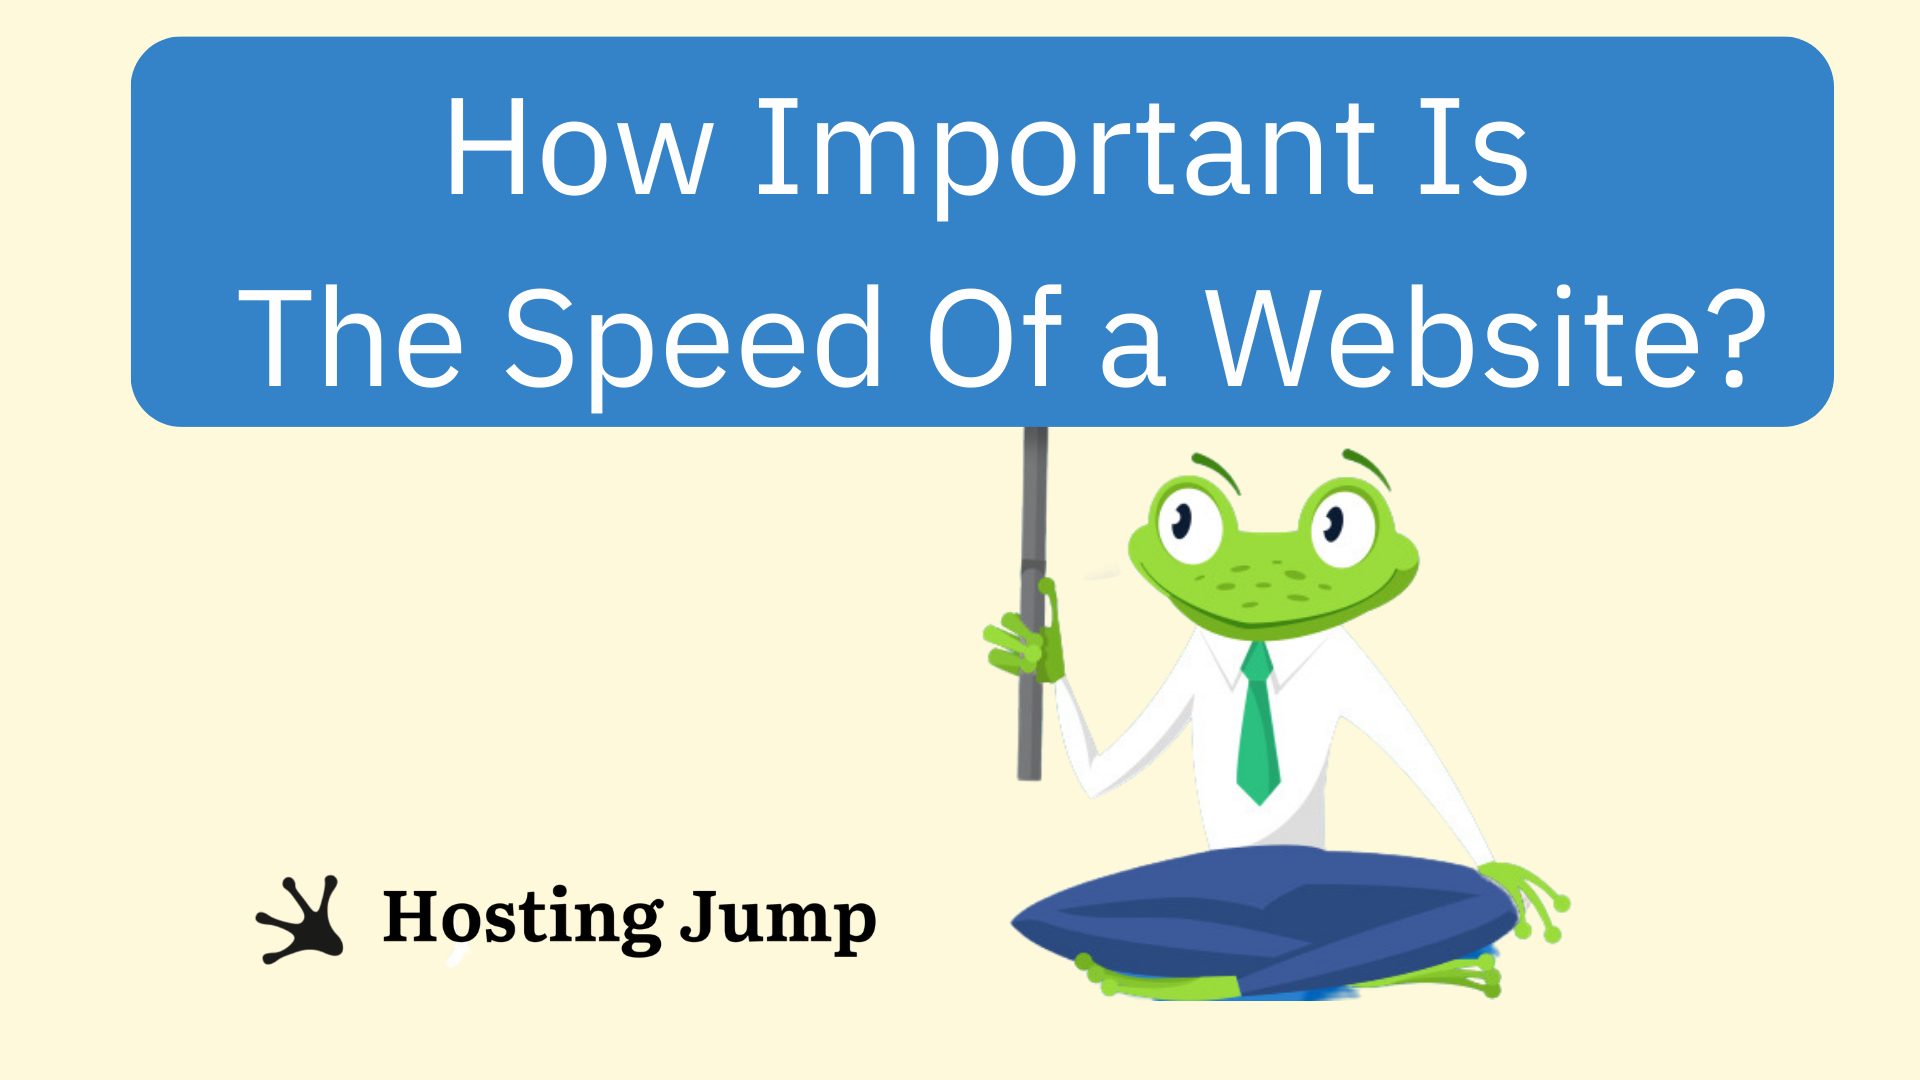 How Important Is The Speed Of a Website?